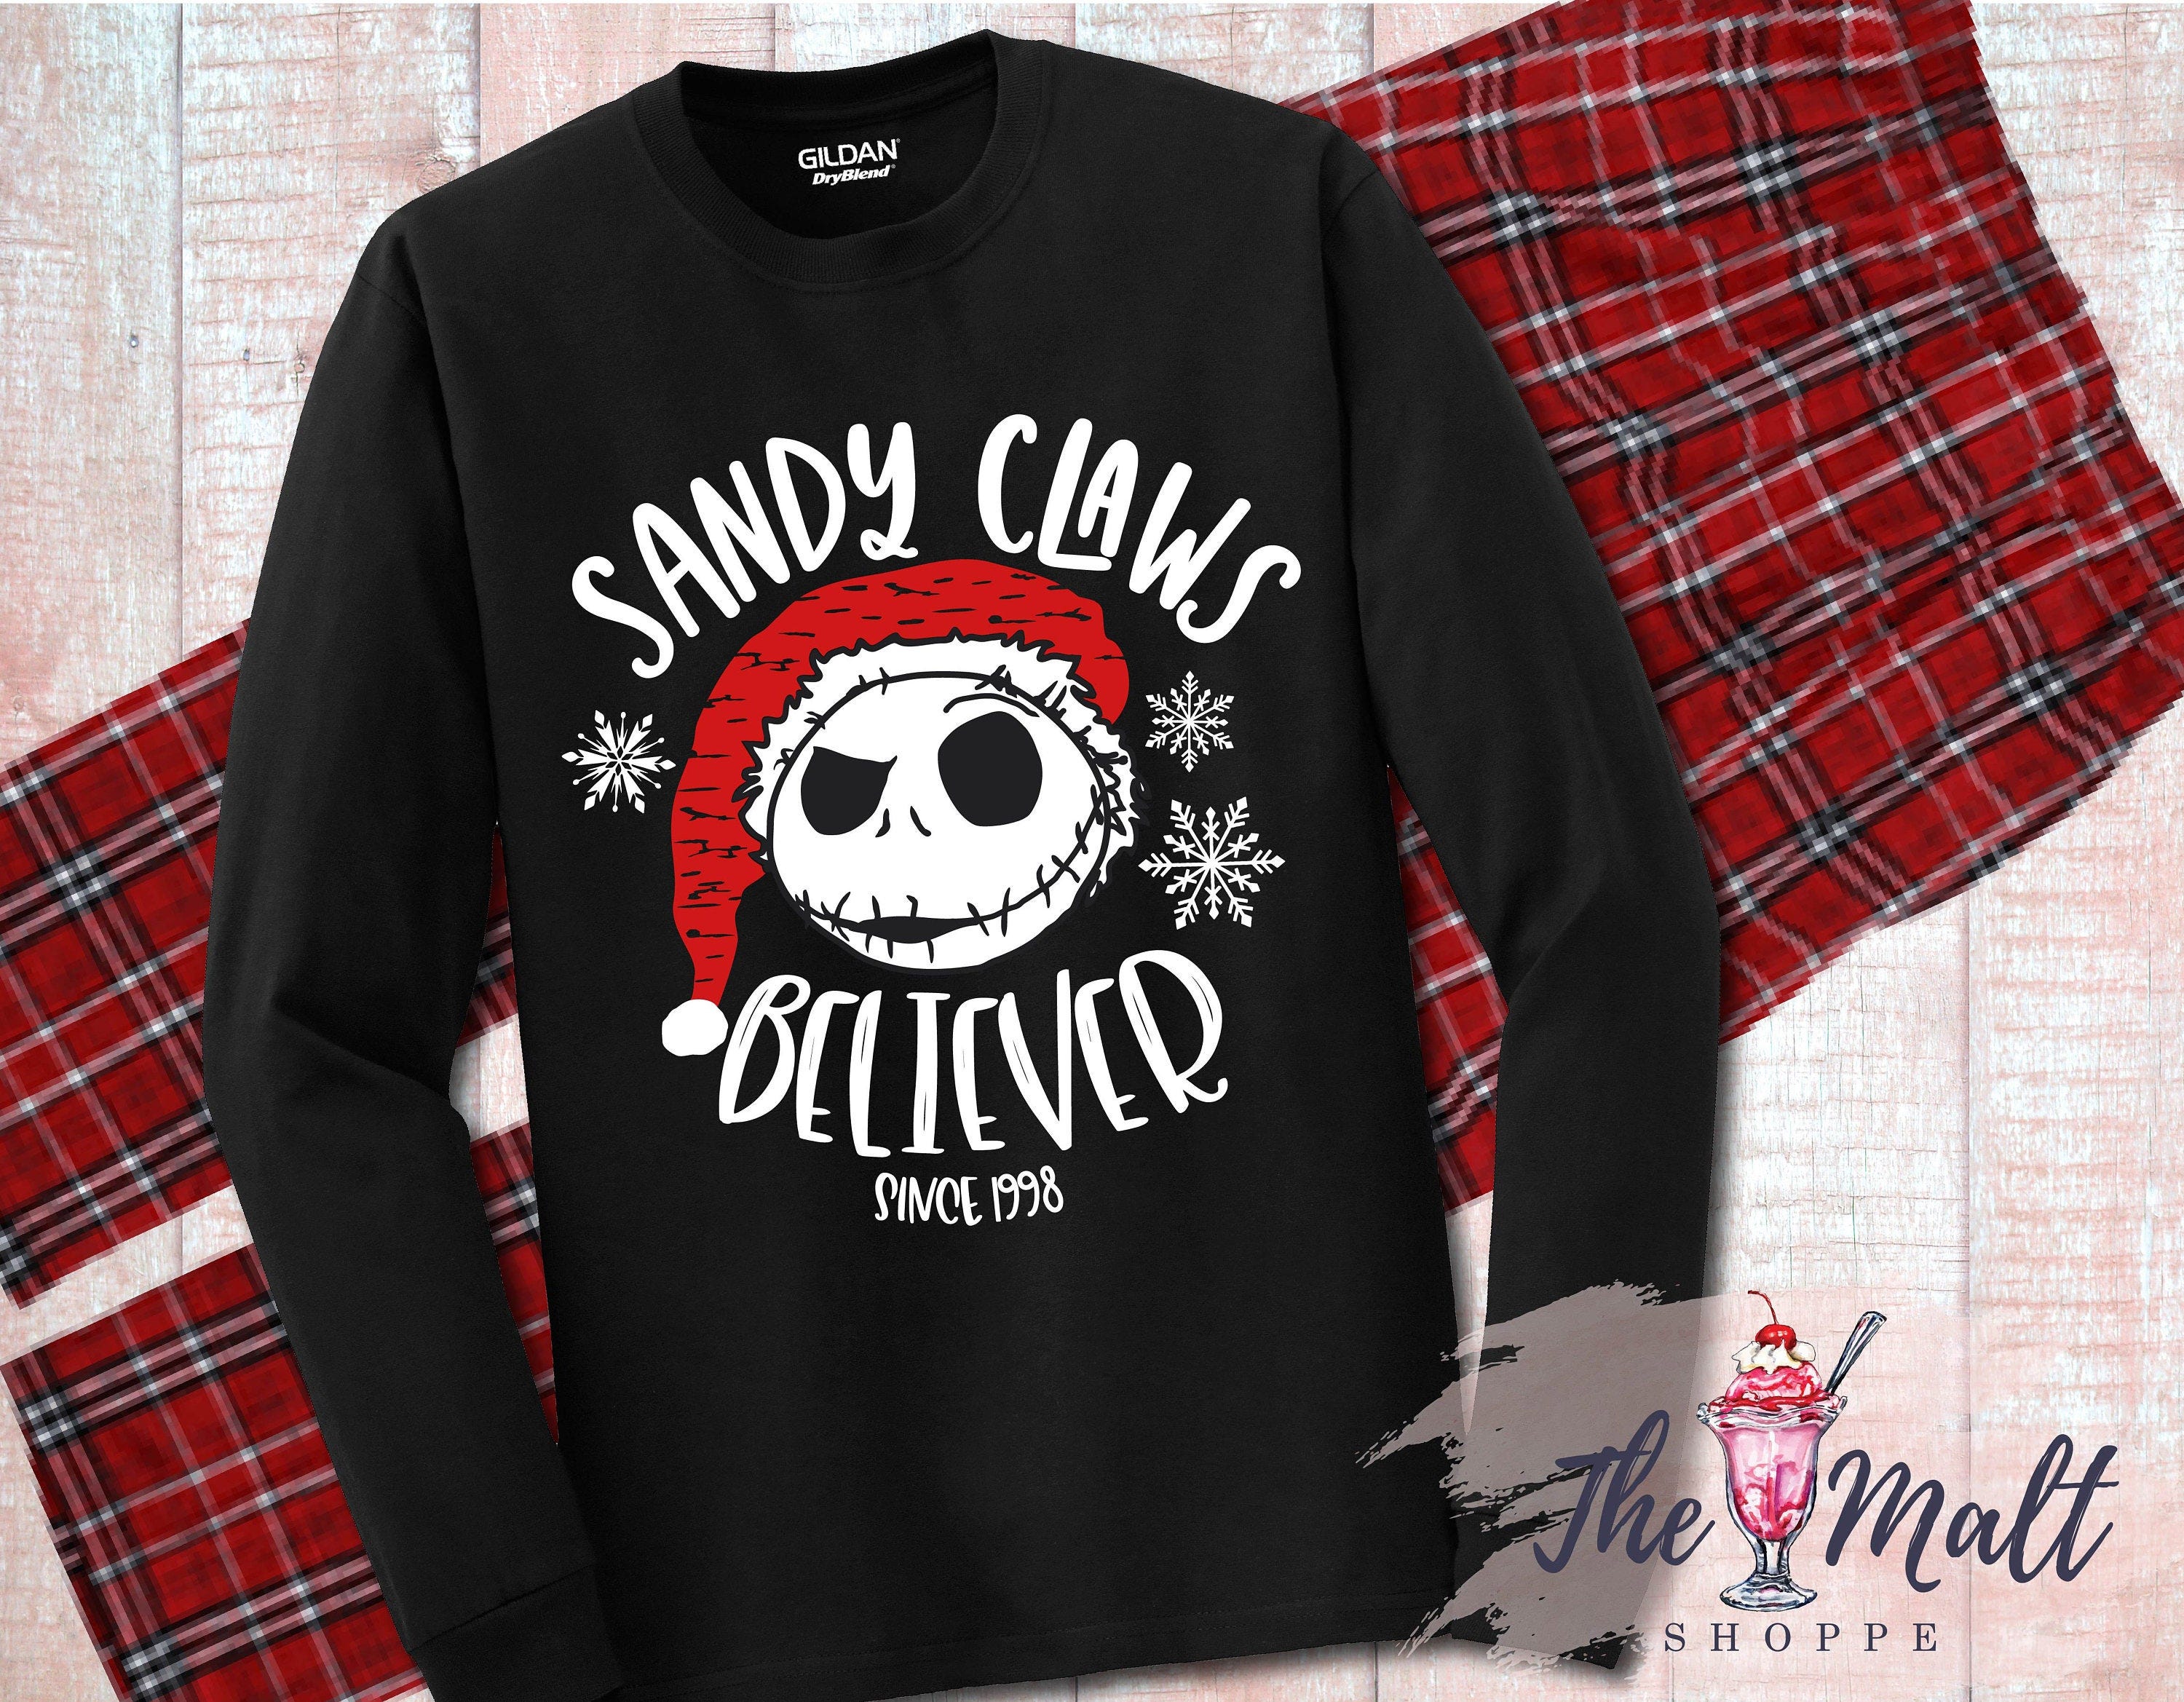 MALT SHOPPE Loungewear *Sandy Claws Believer* Inspired by Nightmare Before Christmas *Jack Skellington* Youth Adult Shirt Pants Set